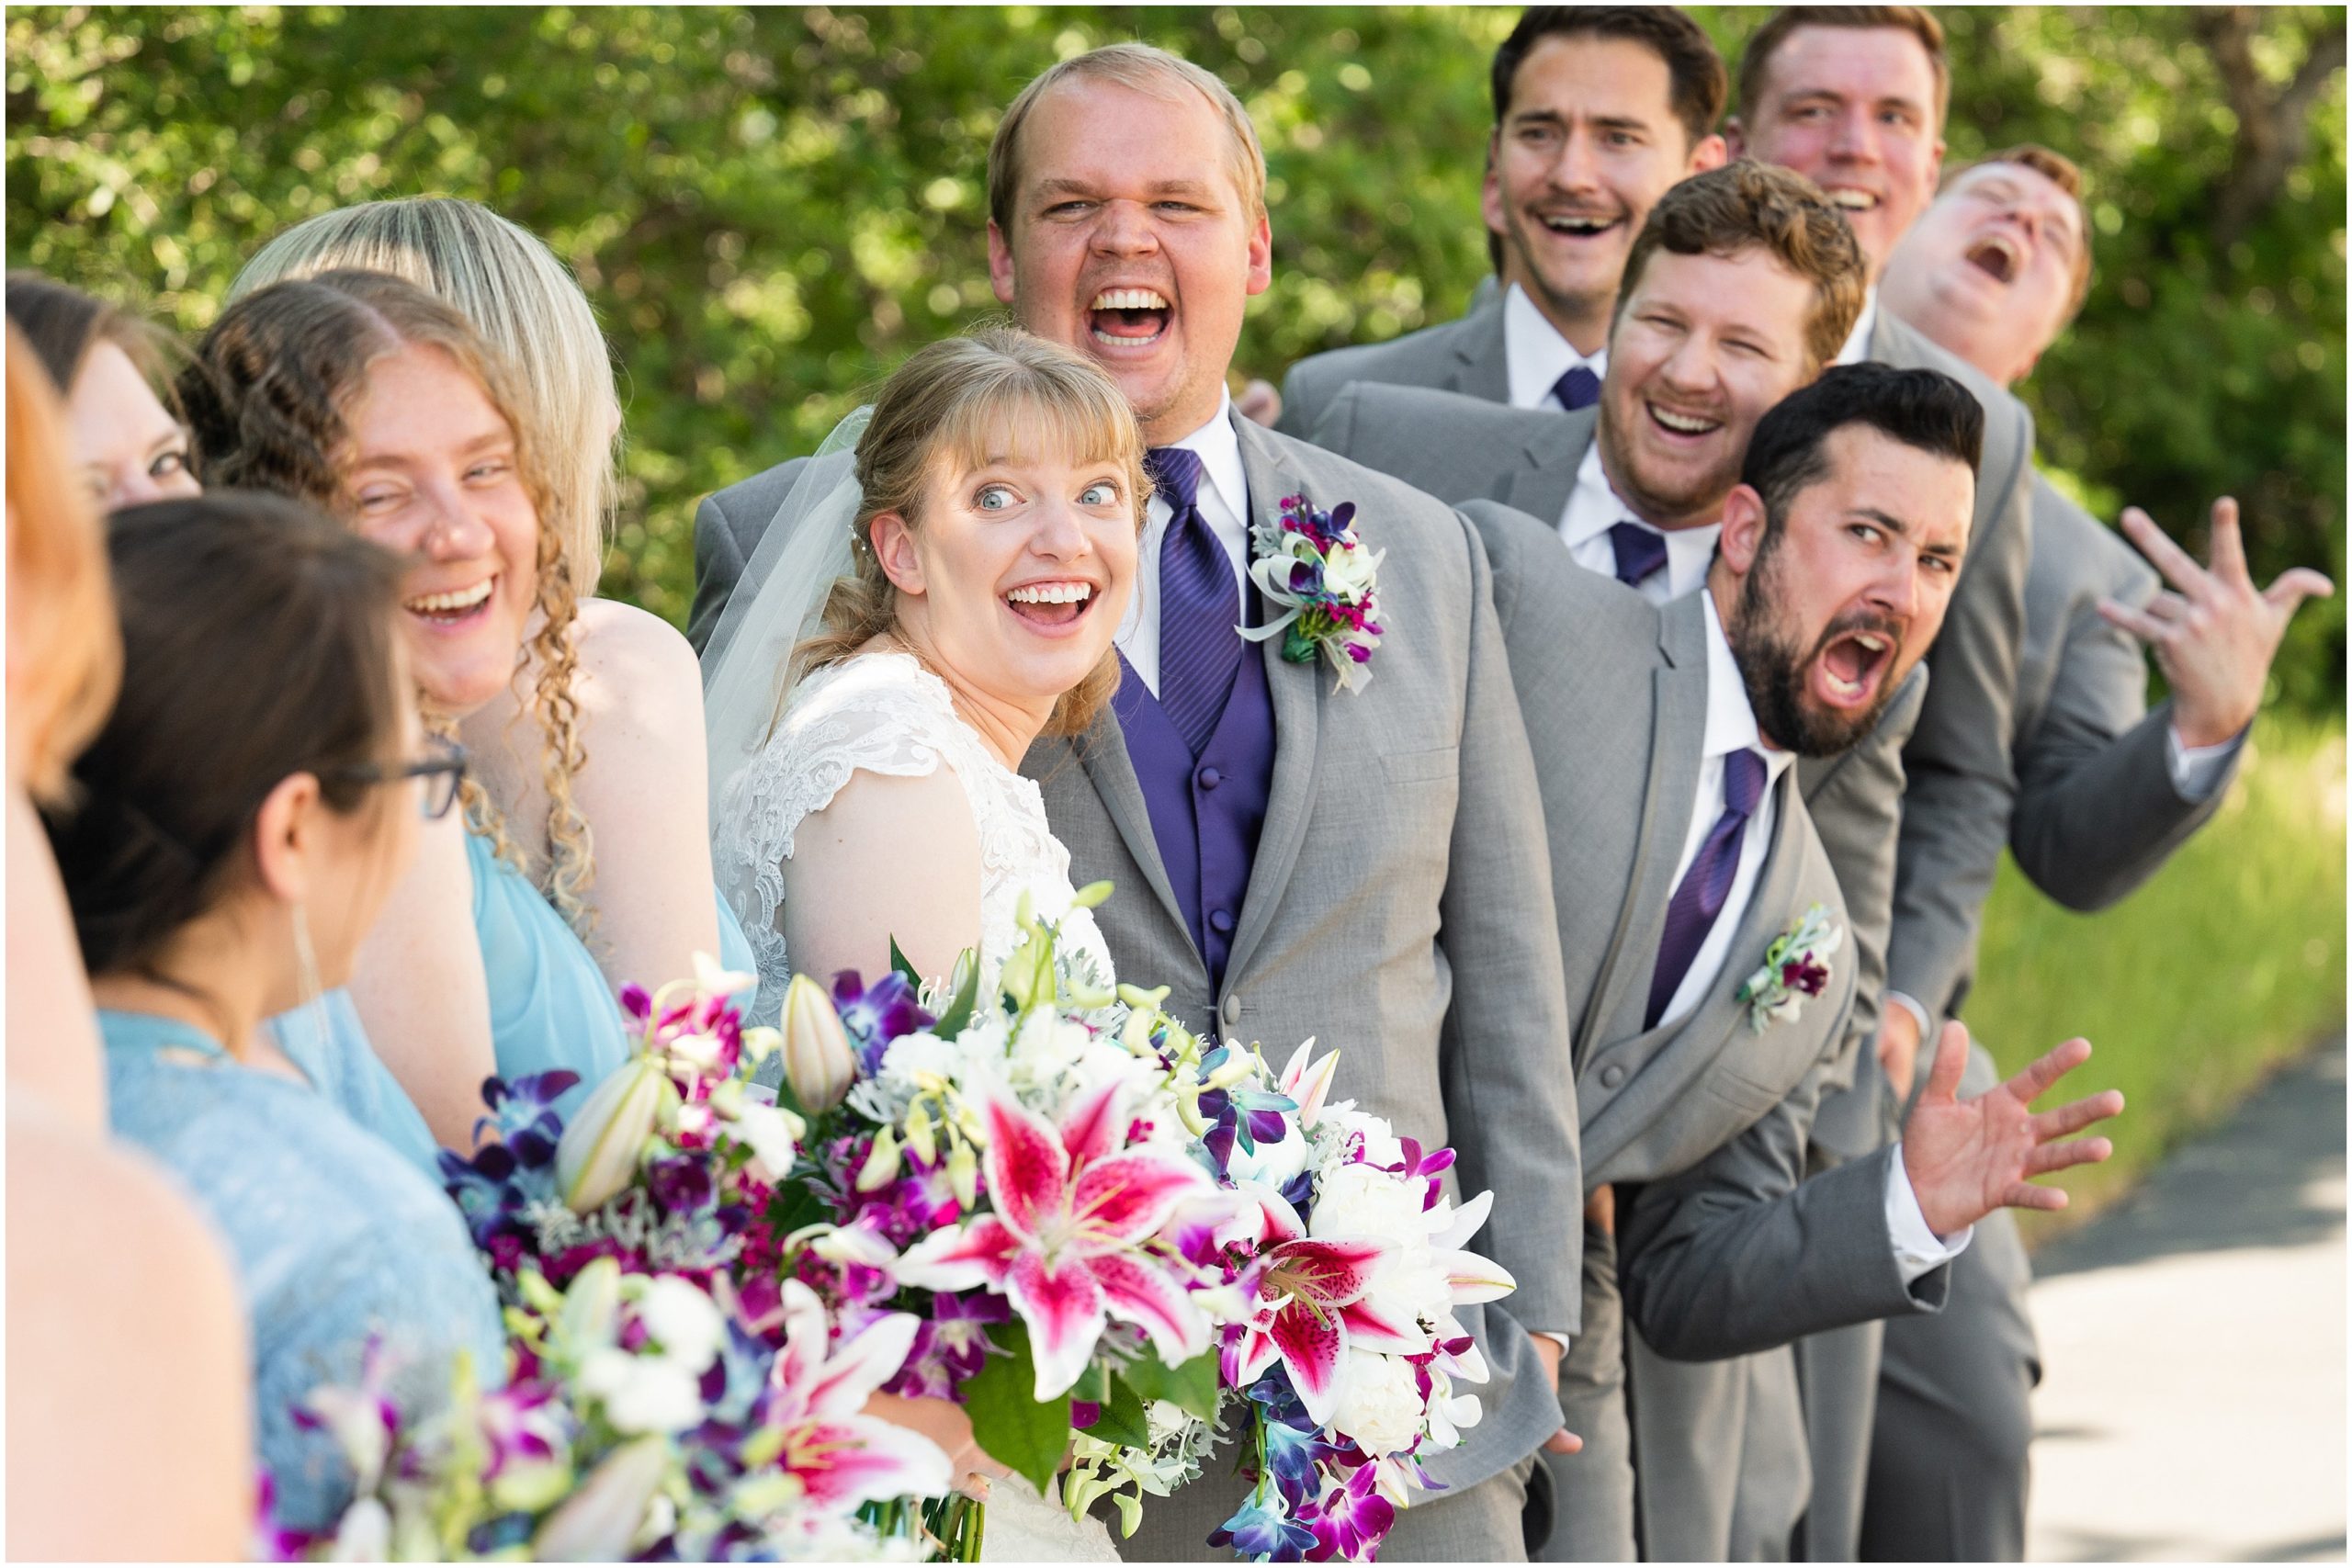 Bridesmaids in Malibu blue dresses with orchid bouquets and Groomsmen in grey suits and purple vests and ties | Orchid Inspired Summer Wedding at Oak Hills Utah | Jessie and Dallin Photography